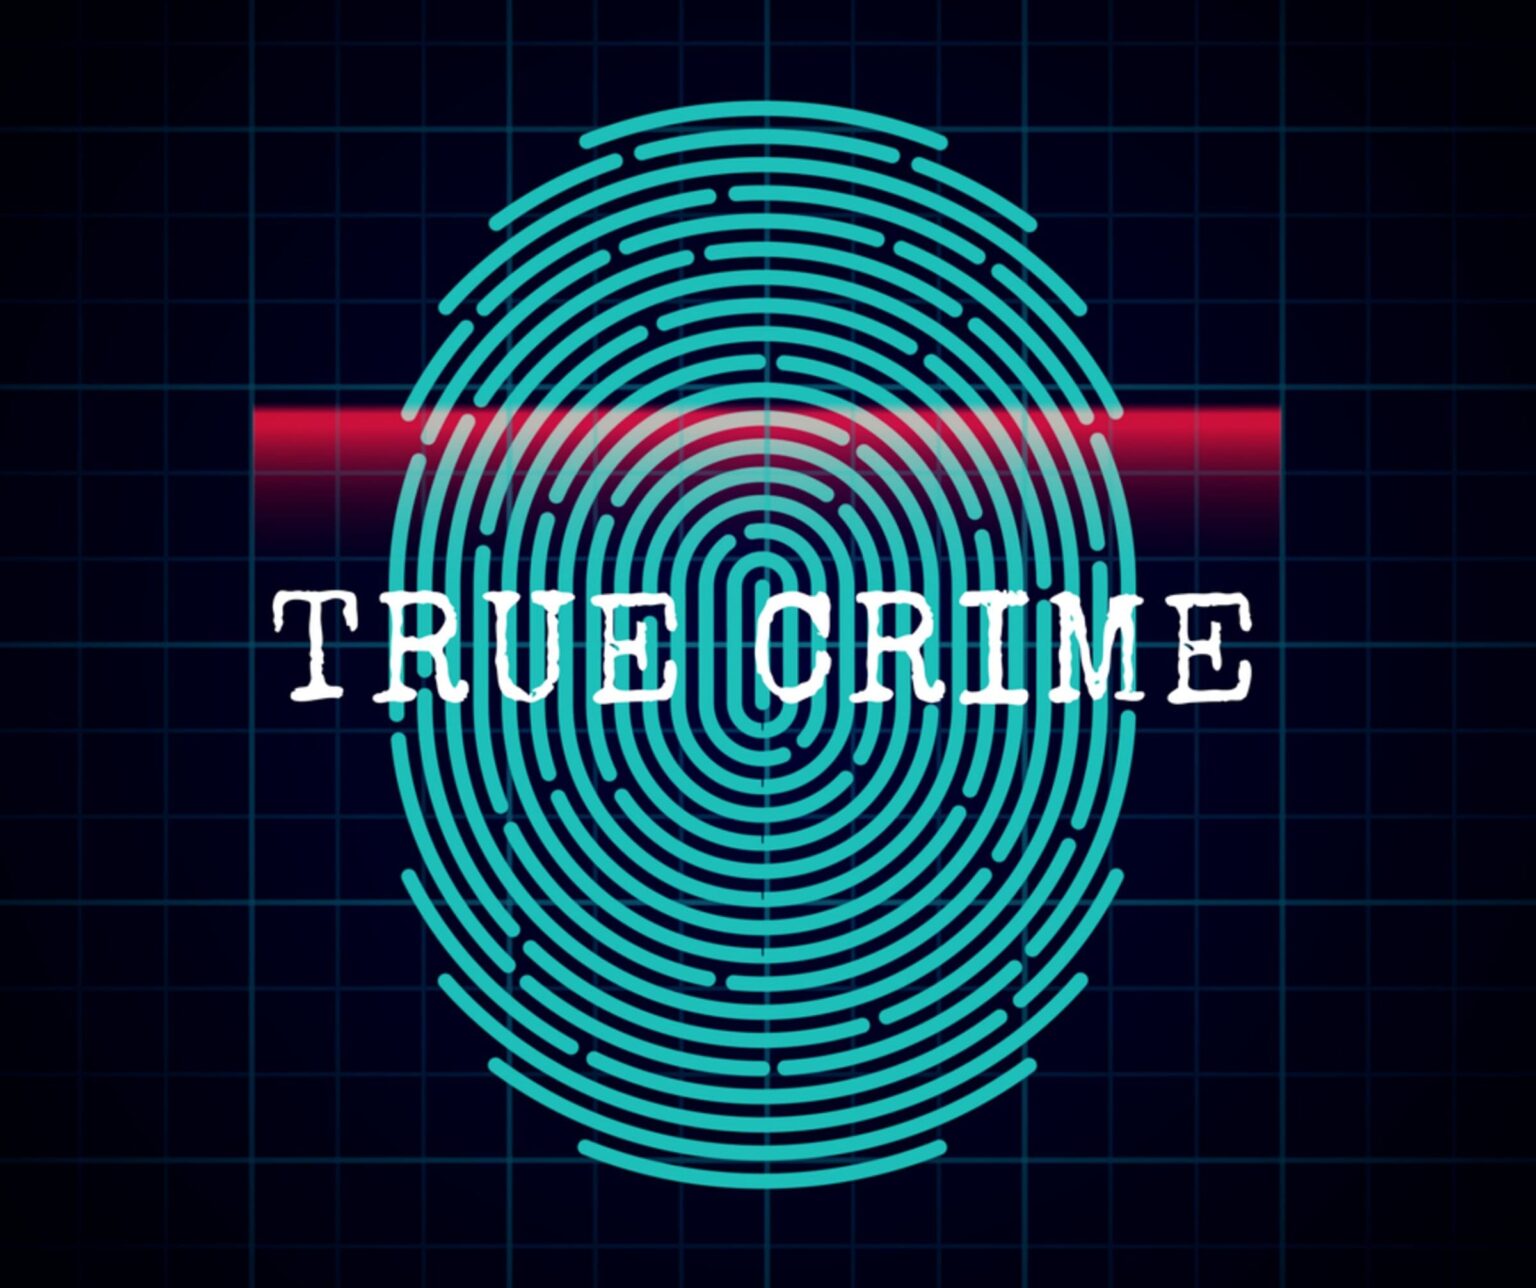 Need some new true crime podcasts? Tune into these addicting programs